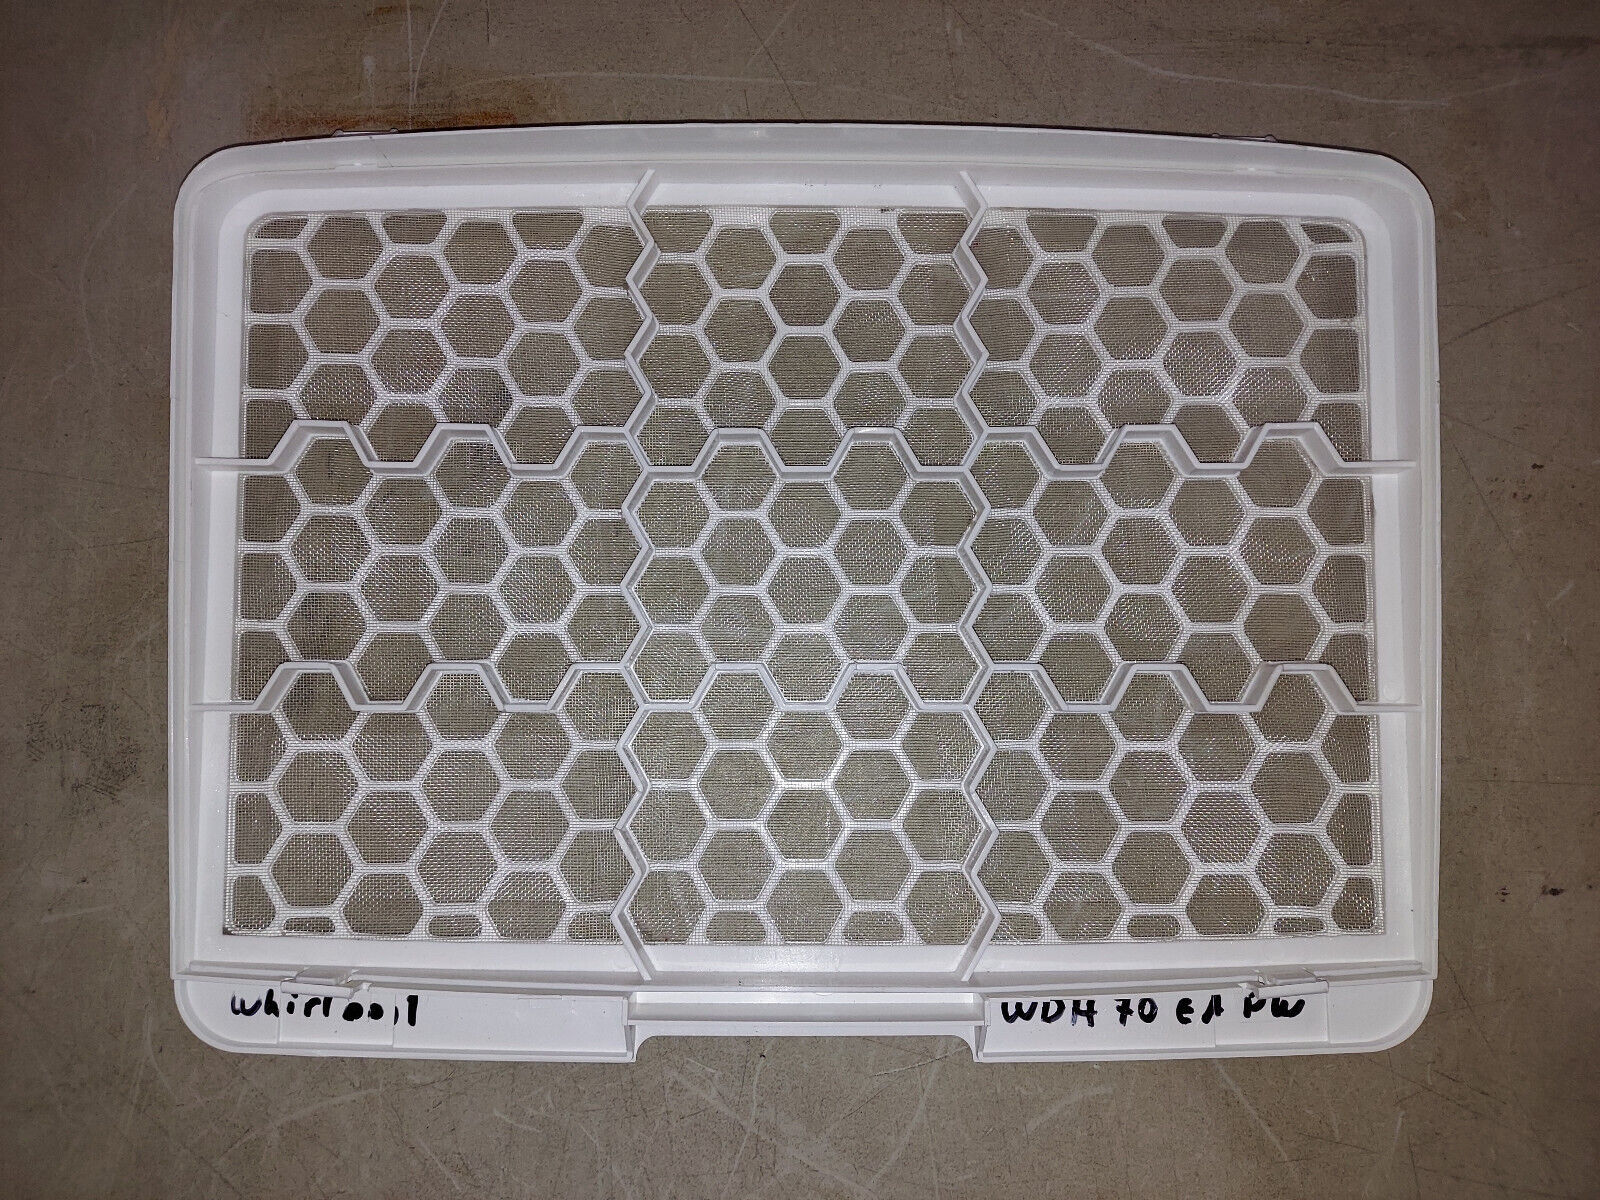 Primary image for 23BB72 WHIRLPOOL WDH70EAPW DEHUMIDIFIER FILTER, VERY GOOD CONDITION